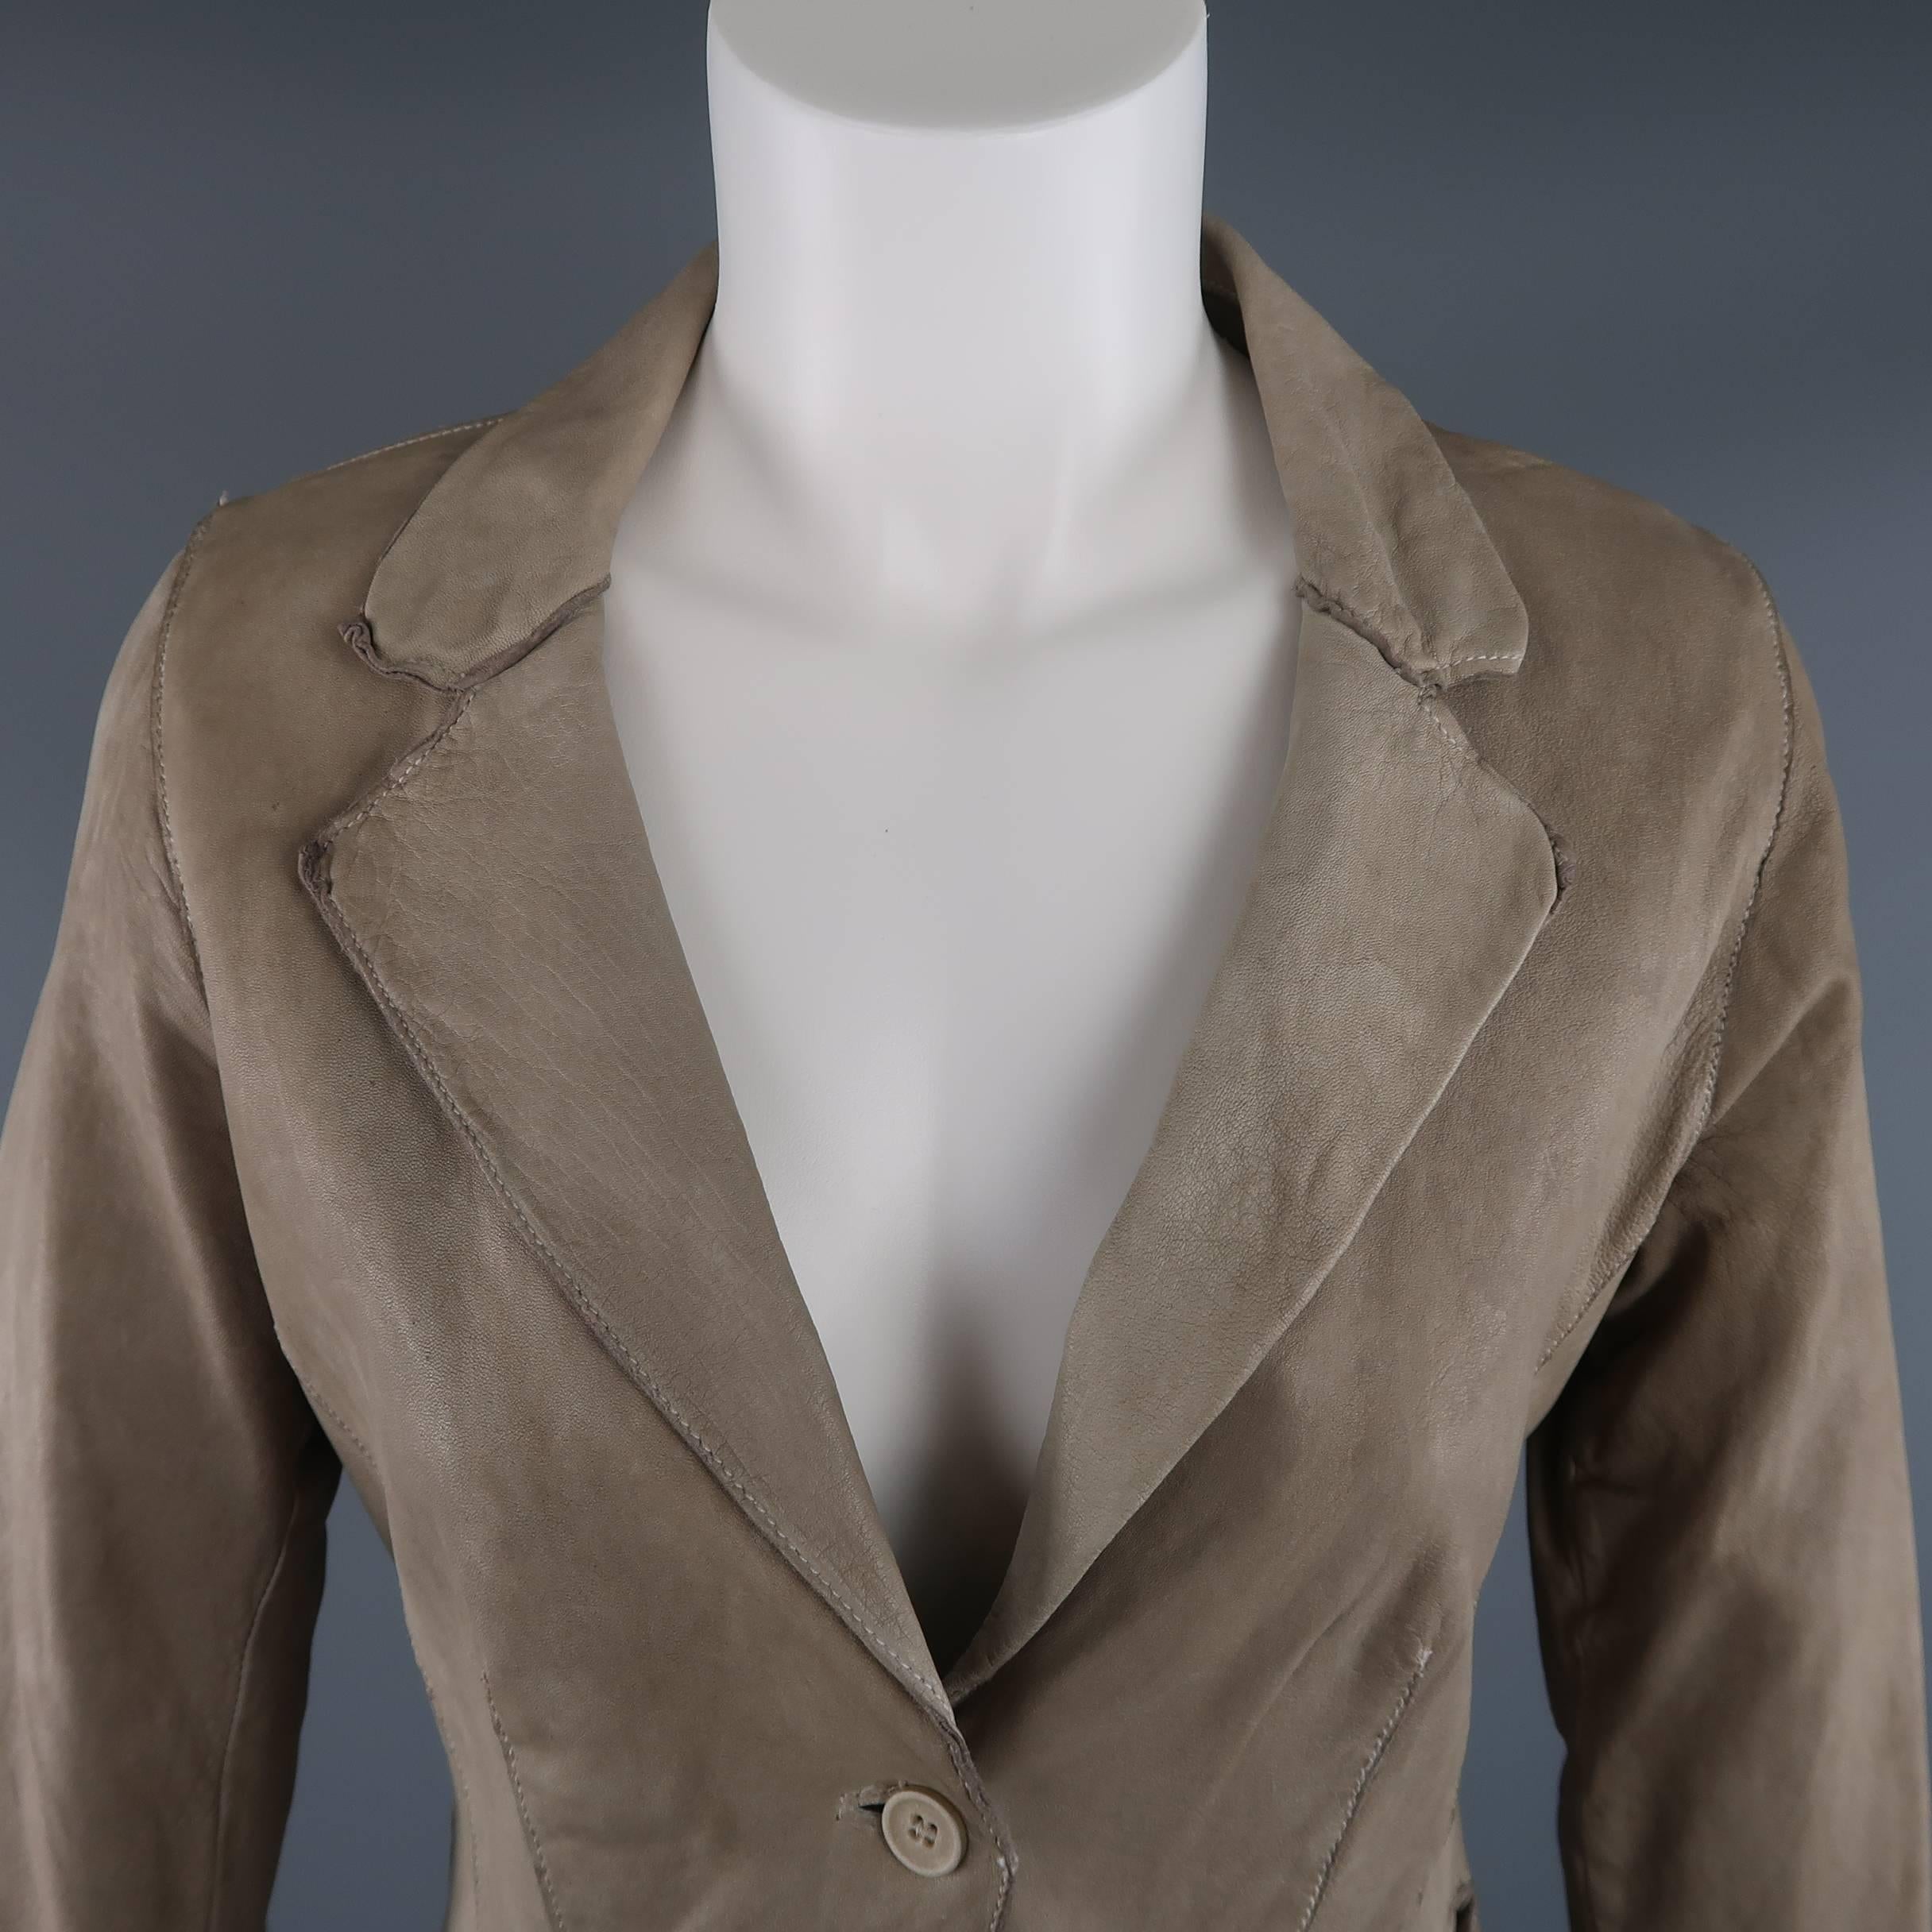 TRANSIT PAR-SUCK sport coat comes in a light washed taupe dyed distressed leather and features a notch lapel, two button closure, slip pockets, and extended crepe liner. Made in Italy.
 
Good Pre-Owned Condition.
Marked: 2

Original Retail Price: